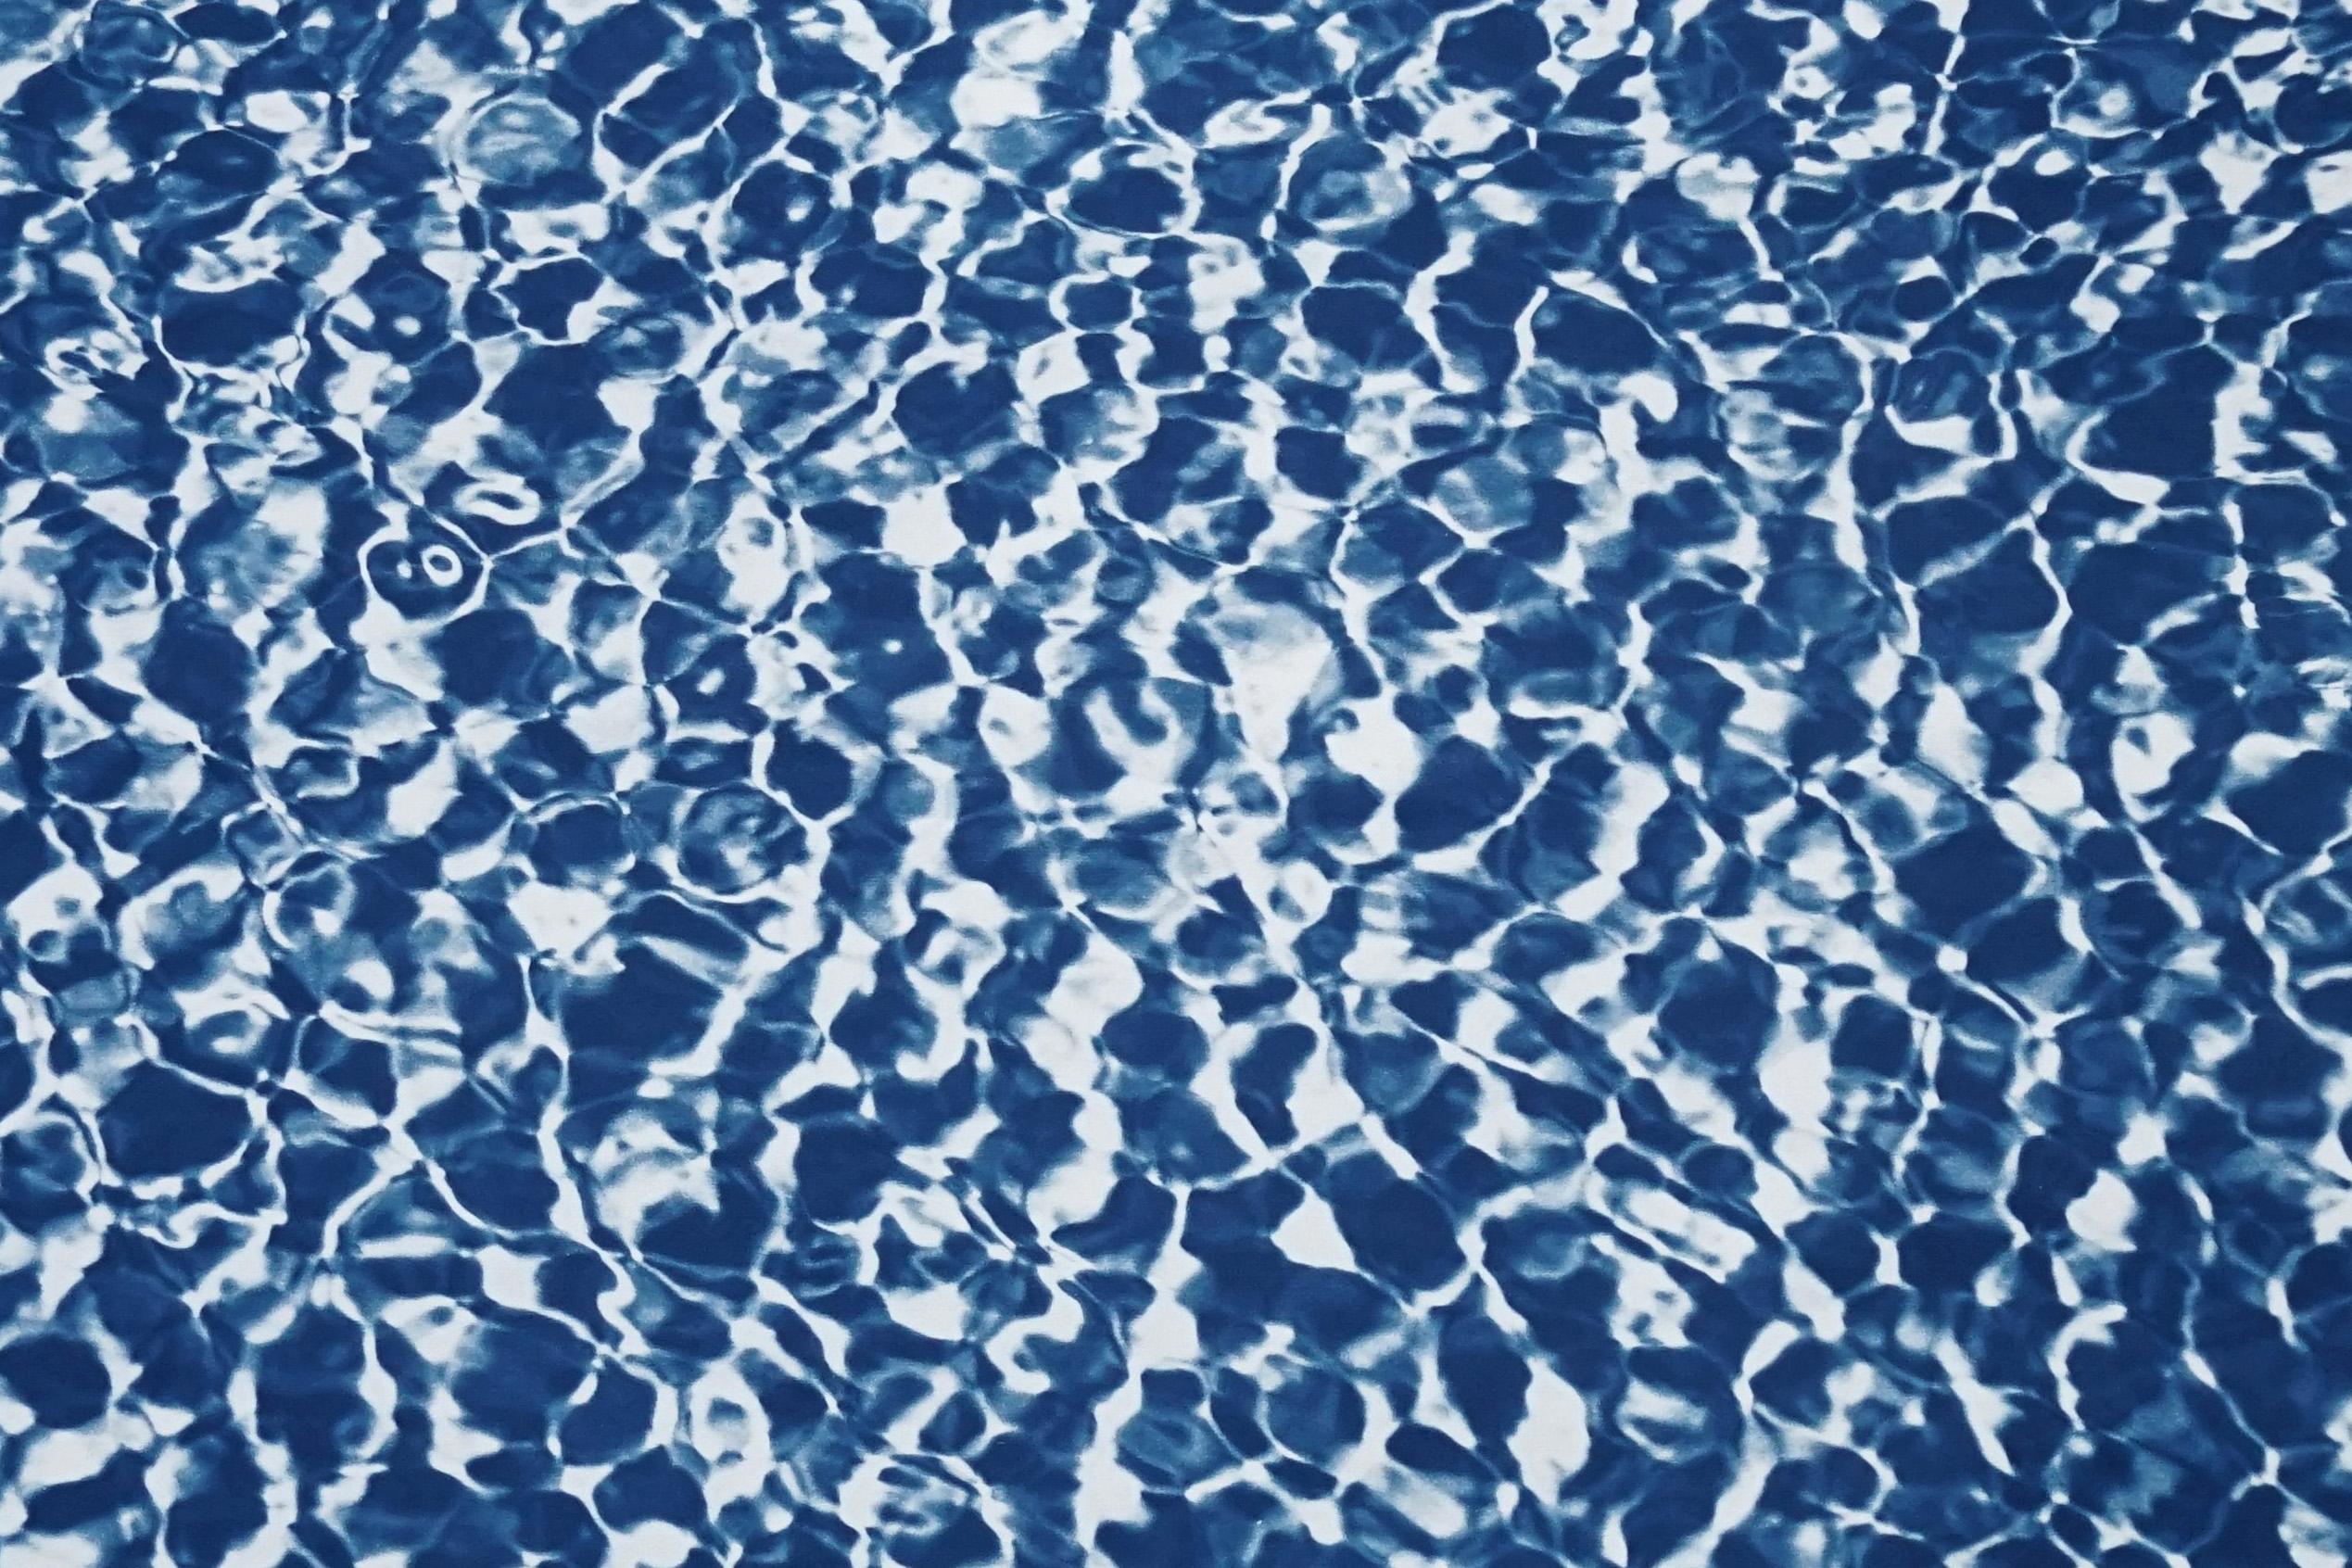 Handmade Cyanotype of Infinity Pool Water Reflecctiona, Blue and White on Paper - Contemporary Print by Kind of Cyan